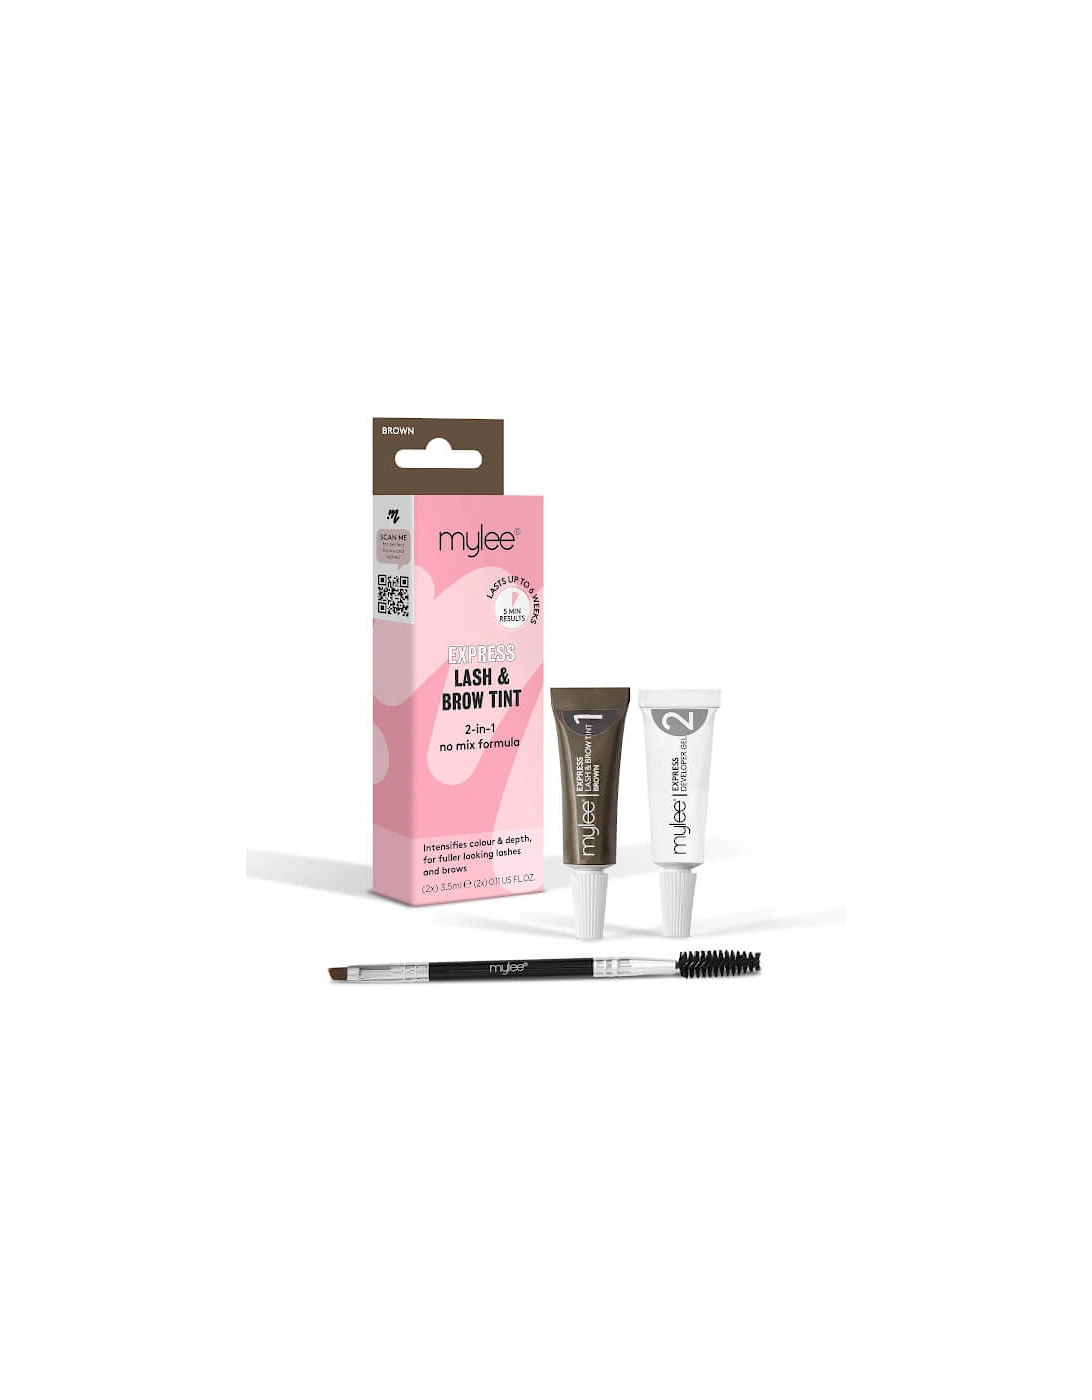 Express 2 in 1 Lash and Brow Tint - Brown, 2 of 1